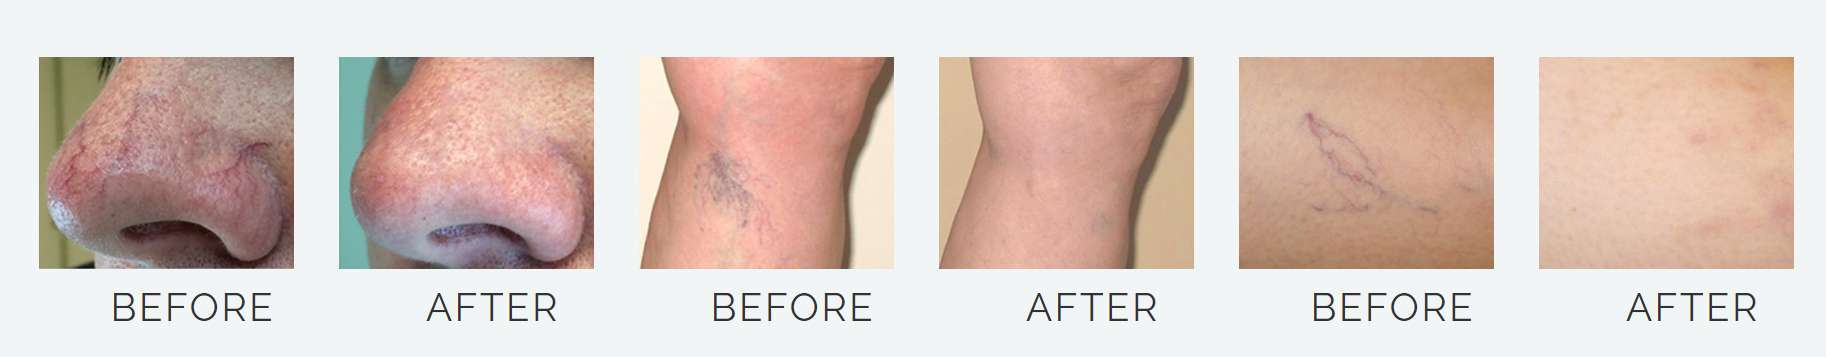 Laser Spider Vein Removal Before and After